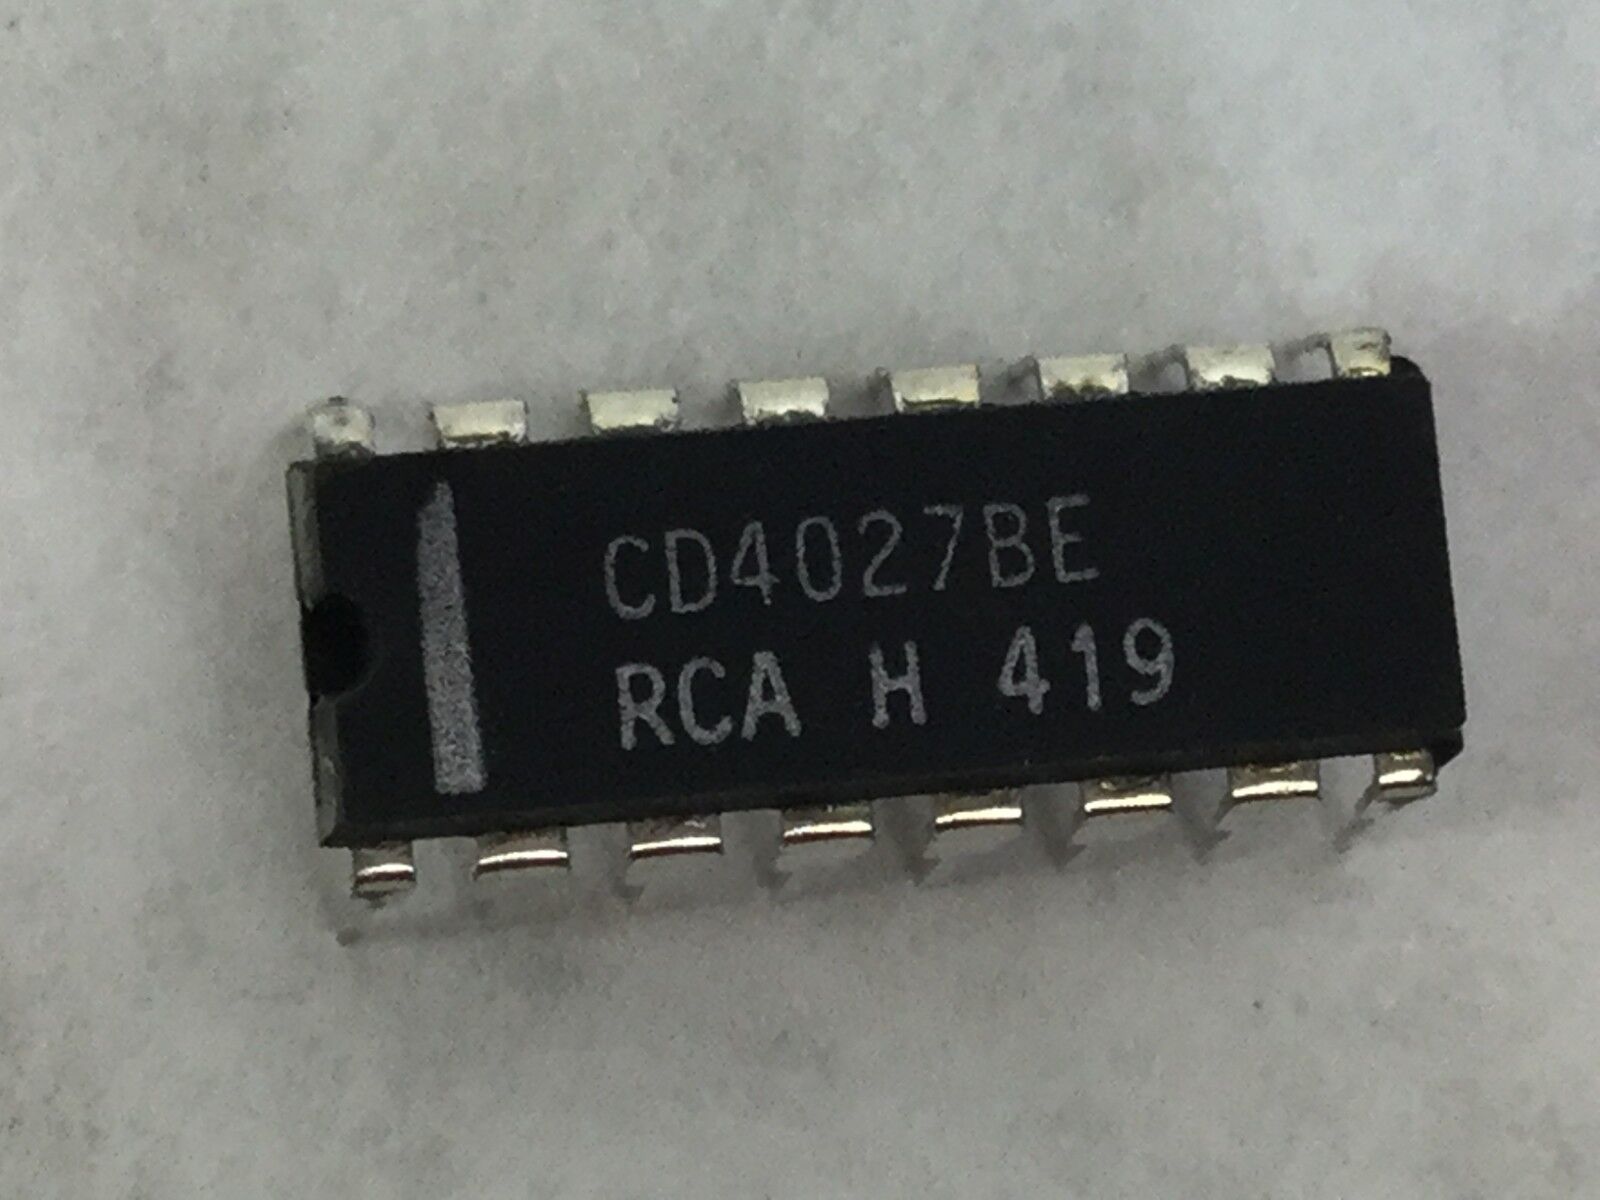 Genuine RCA CD4027BE  Integrated Circuit  16 Pin  Lot of 25